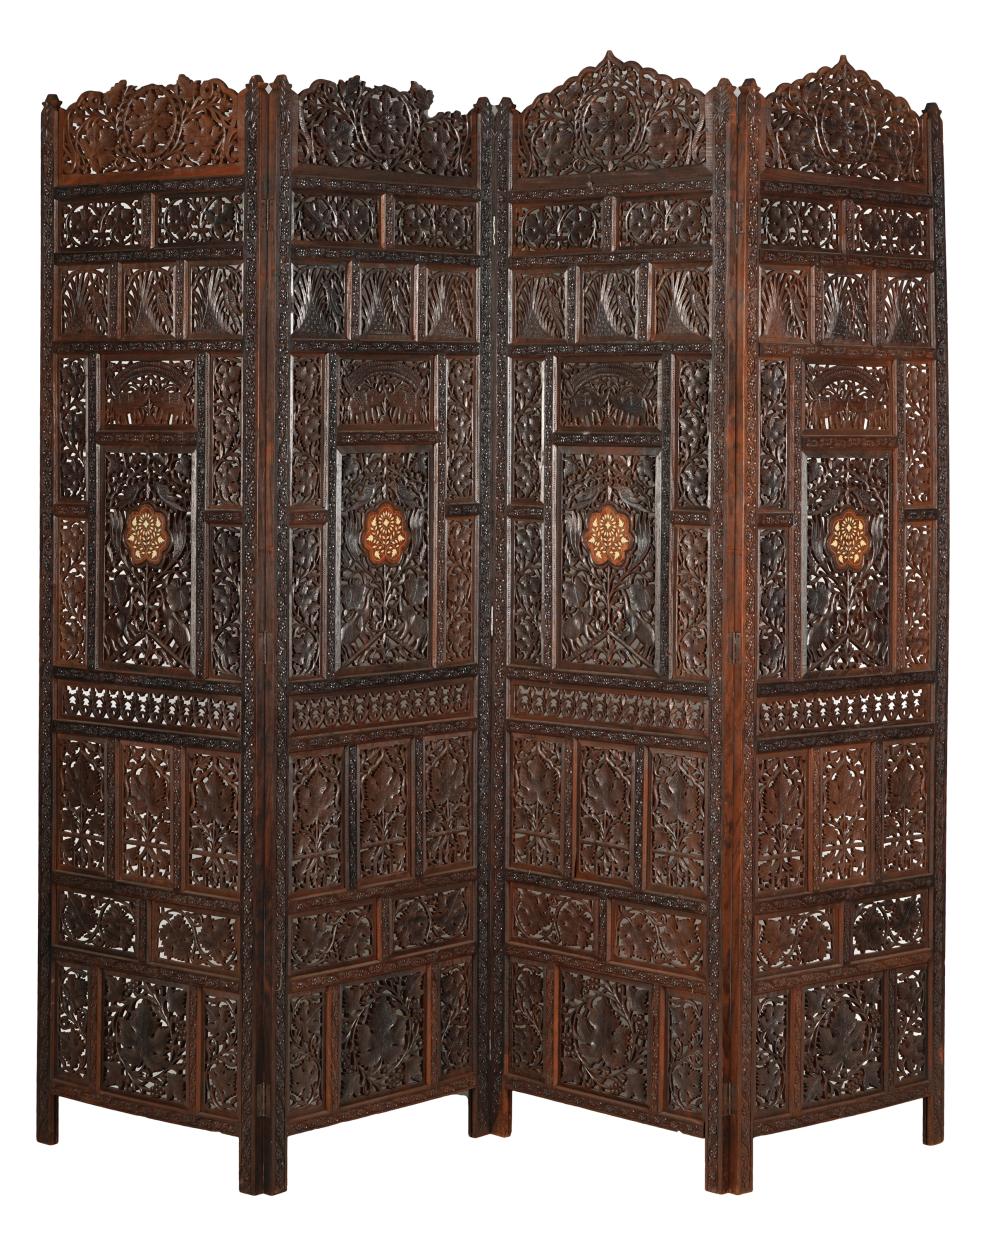 INDONESIAN-STYLE CARVED WOOD FOUR-PANEL